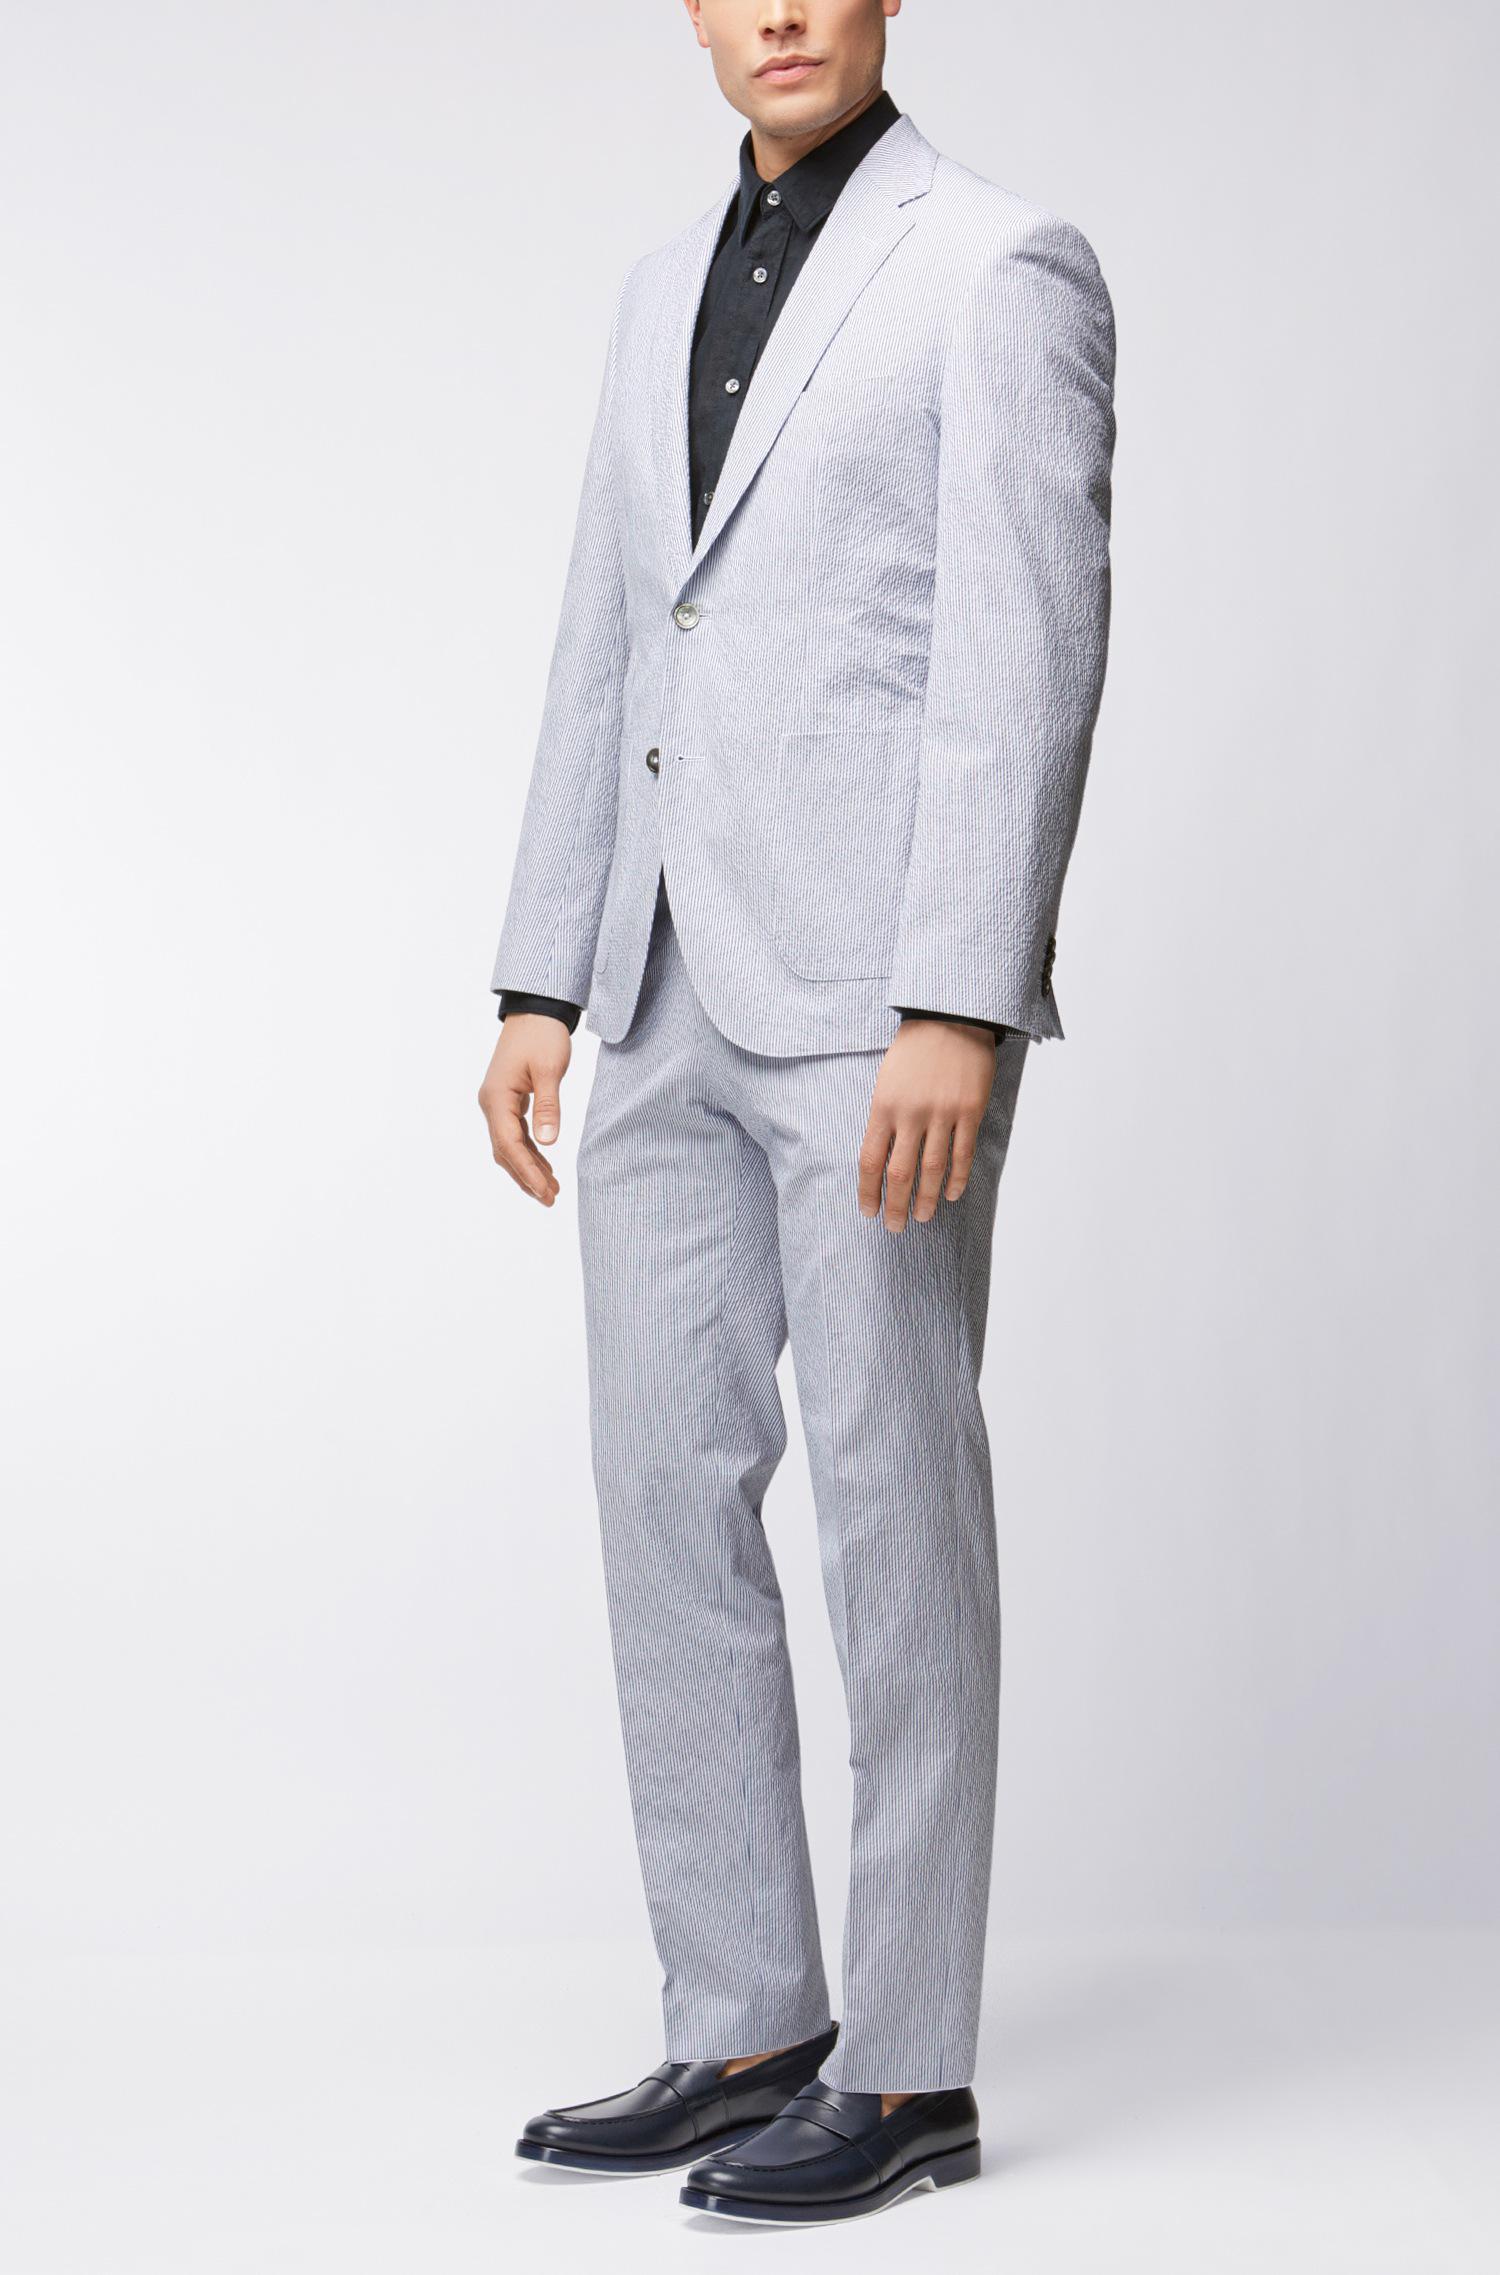 hugo boss seersucker suit OFF 59% - Online Shopping Site for Fashion &  Lifestyle.